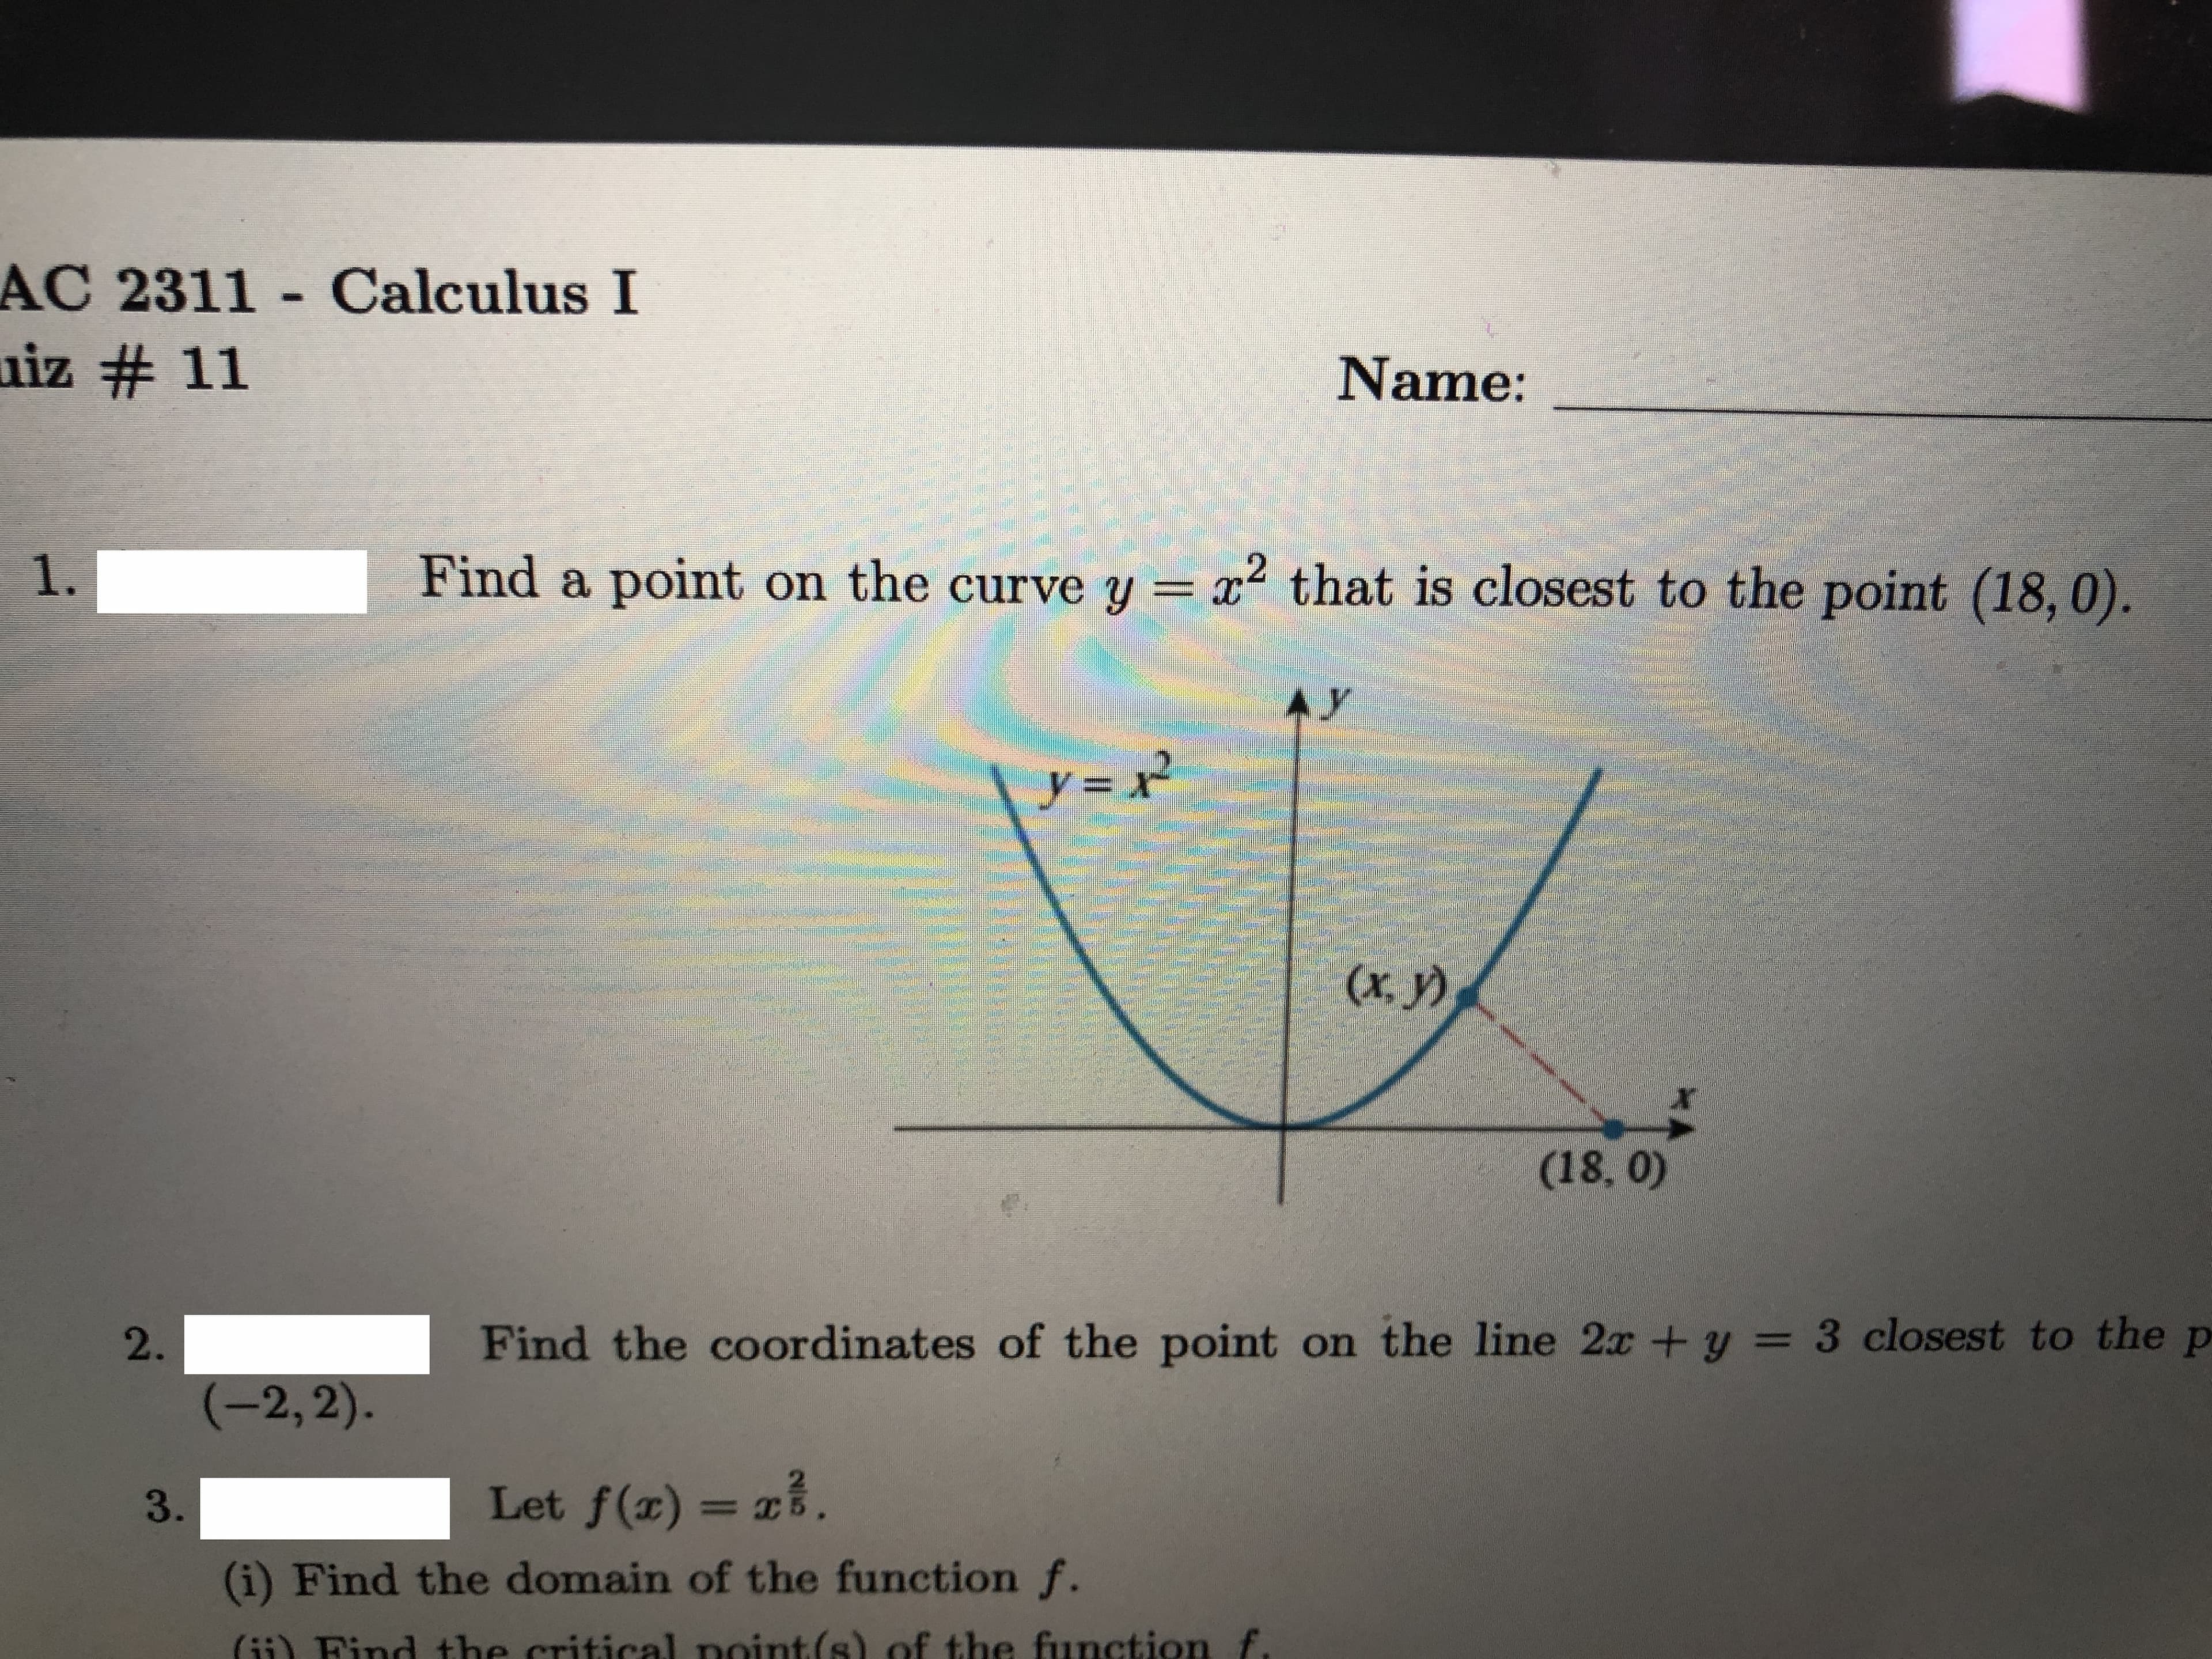 AC 2311 - Calculus I
uiz # 11
Name:
1.
Find a point on the curve y = x2
that is closest to the point (18,0).
AY
y = x
(х, у)
(18, 0)
2.
Find the coordinates of the point on the line 2x + y = 3 closest to the p
(-2, 2).
3.
Let f(r)
= x.
(i) Find the domain of the function f.
(ii) Find the critical point(s) of the function f.
